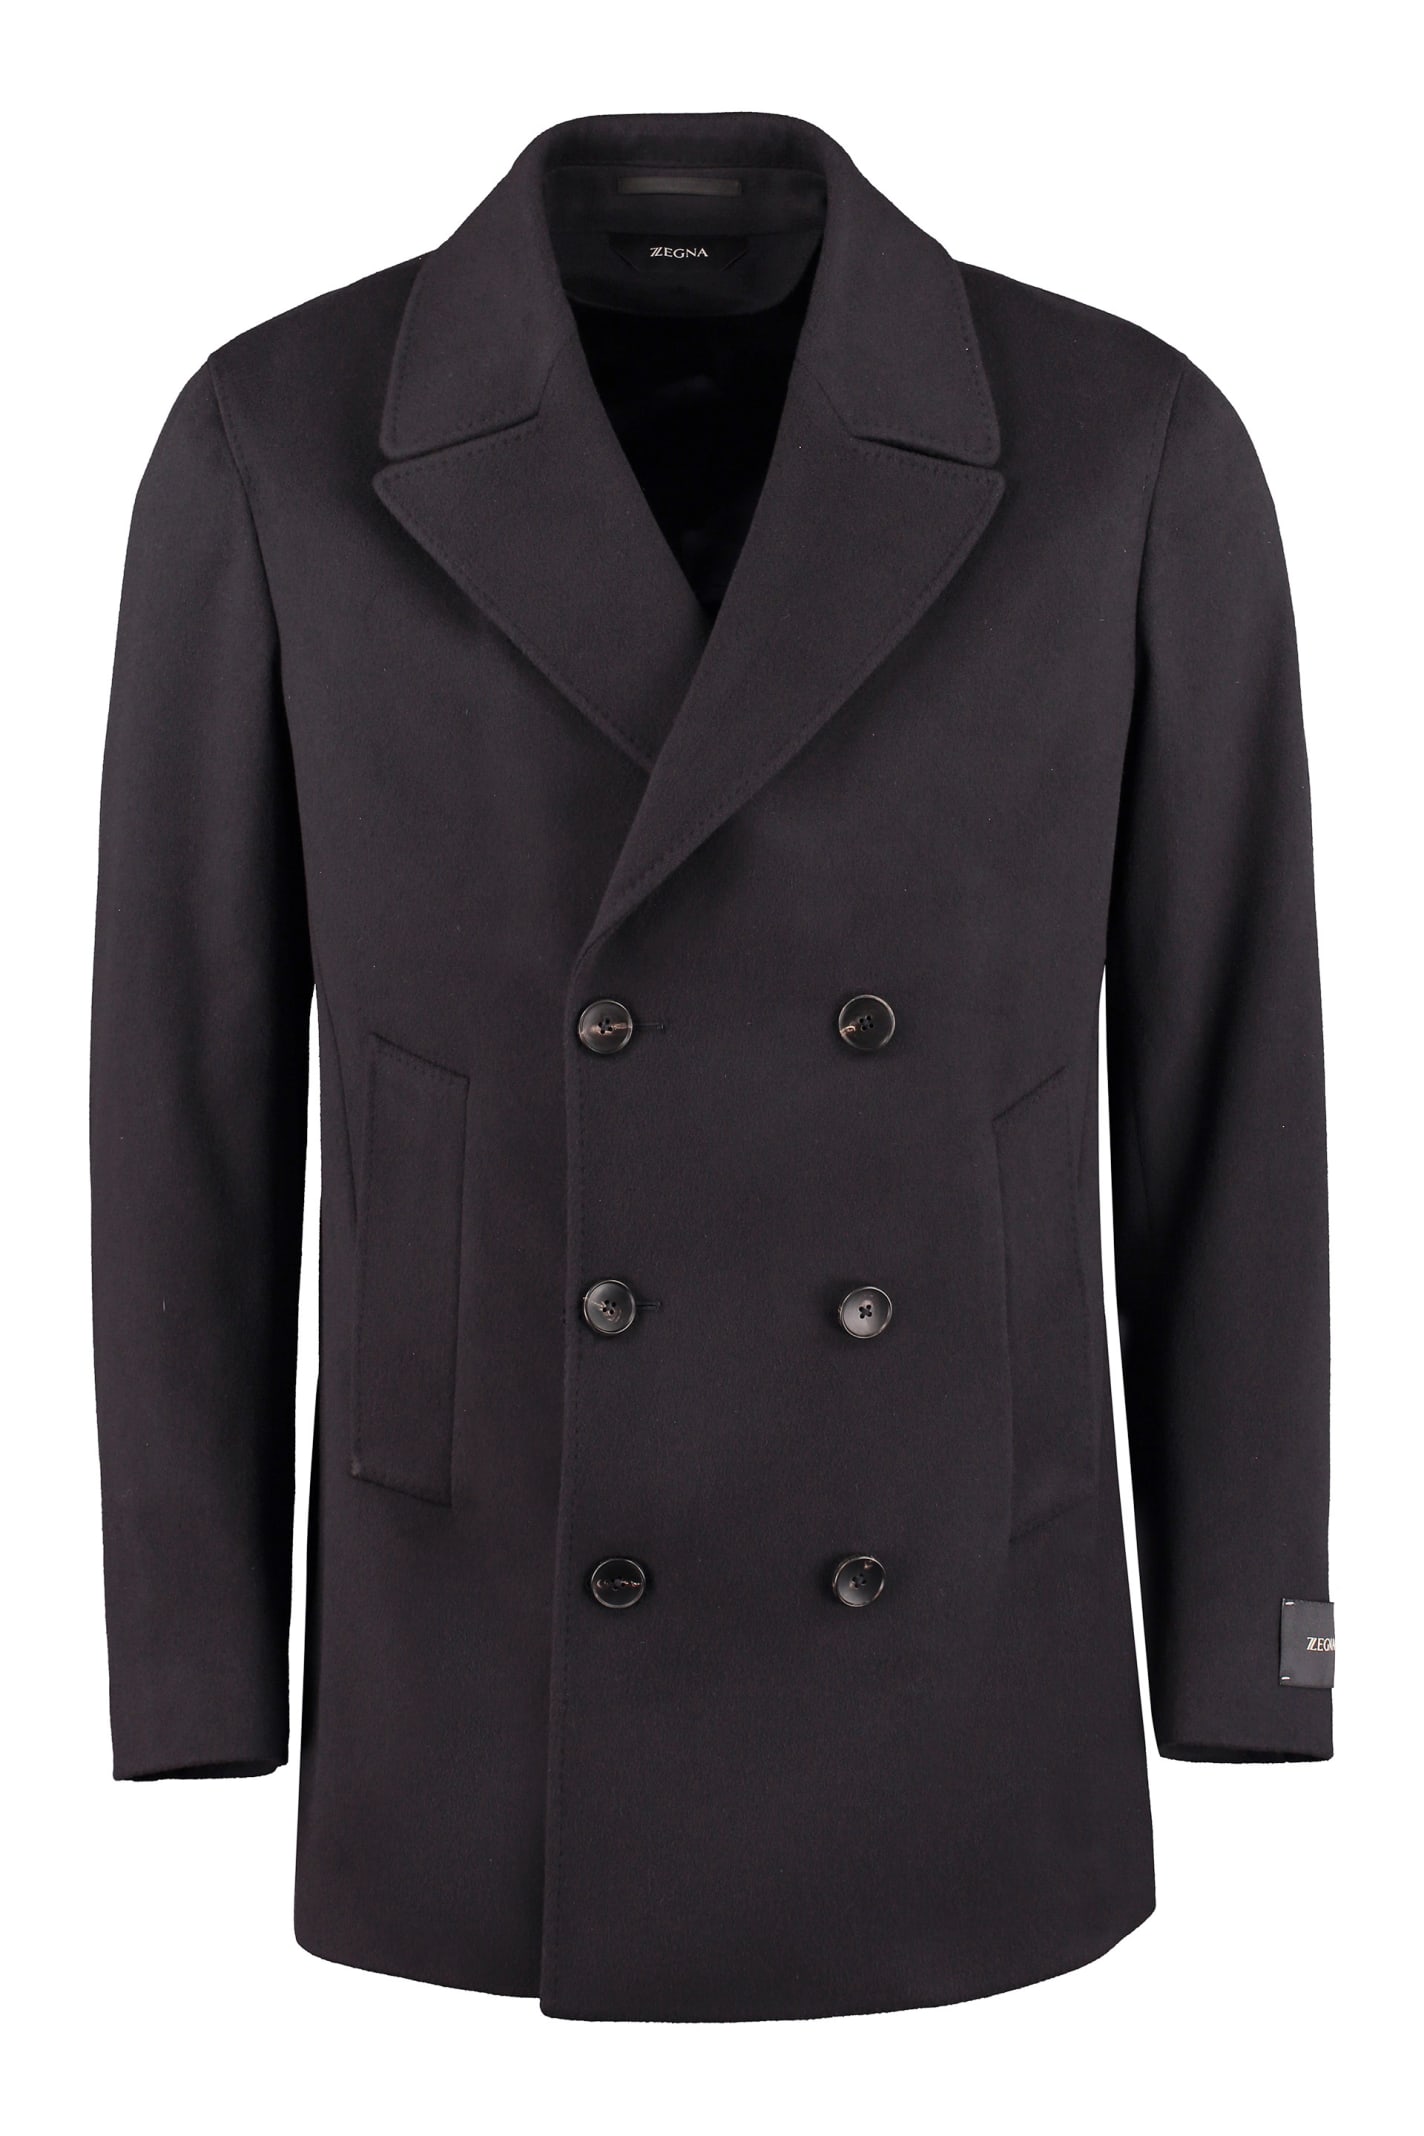 Z Zegna Drop 8 Double-breasted Wool Coat